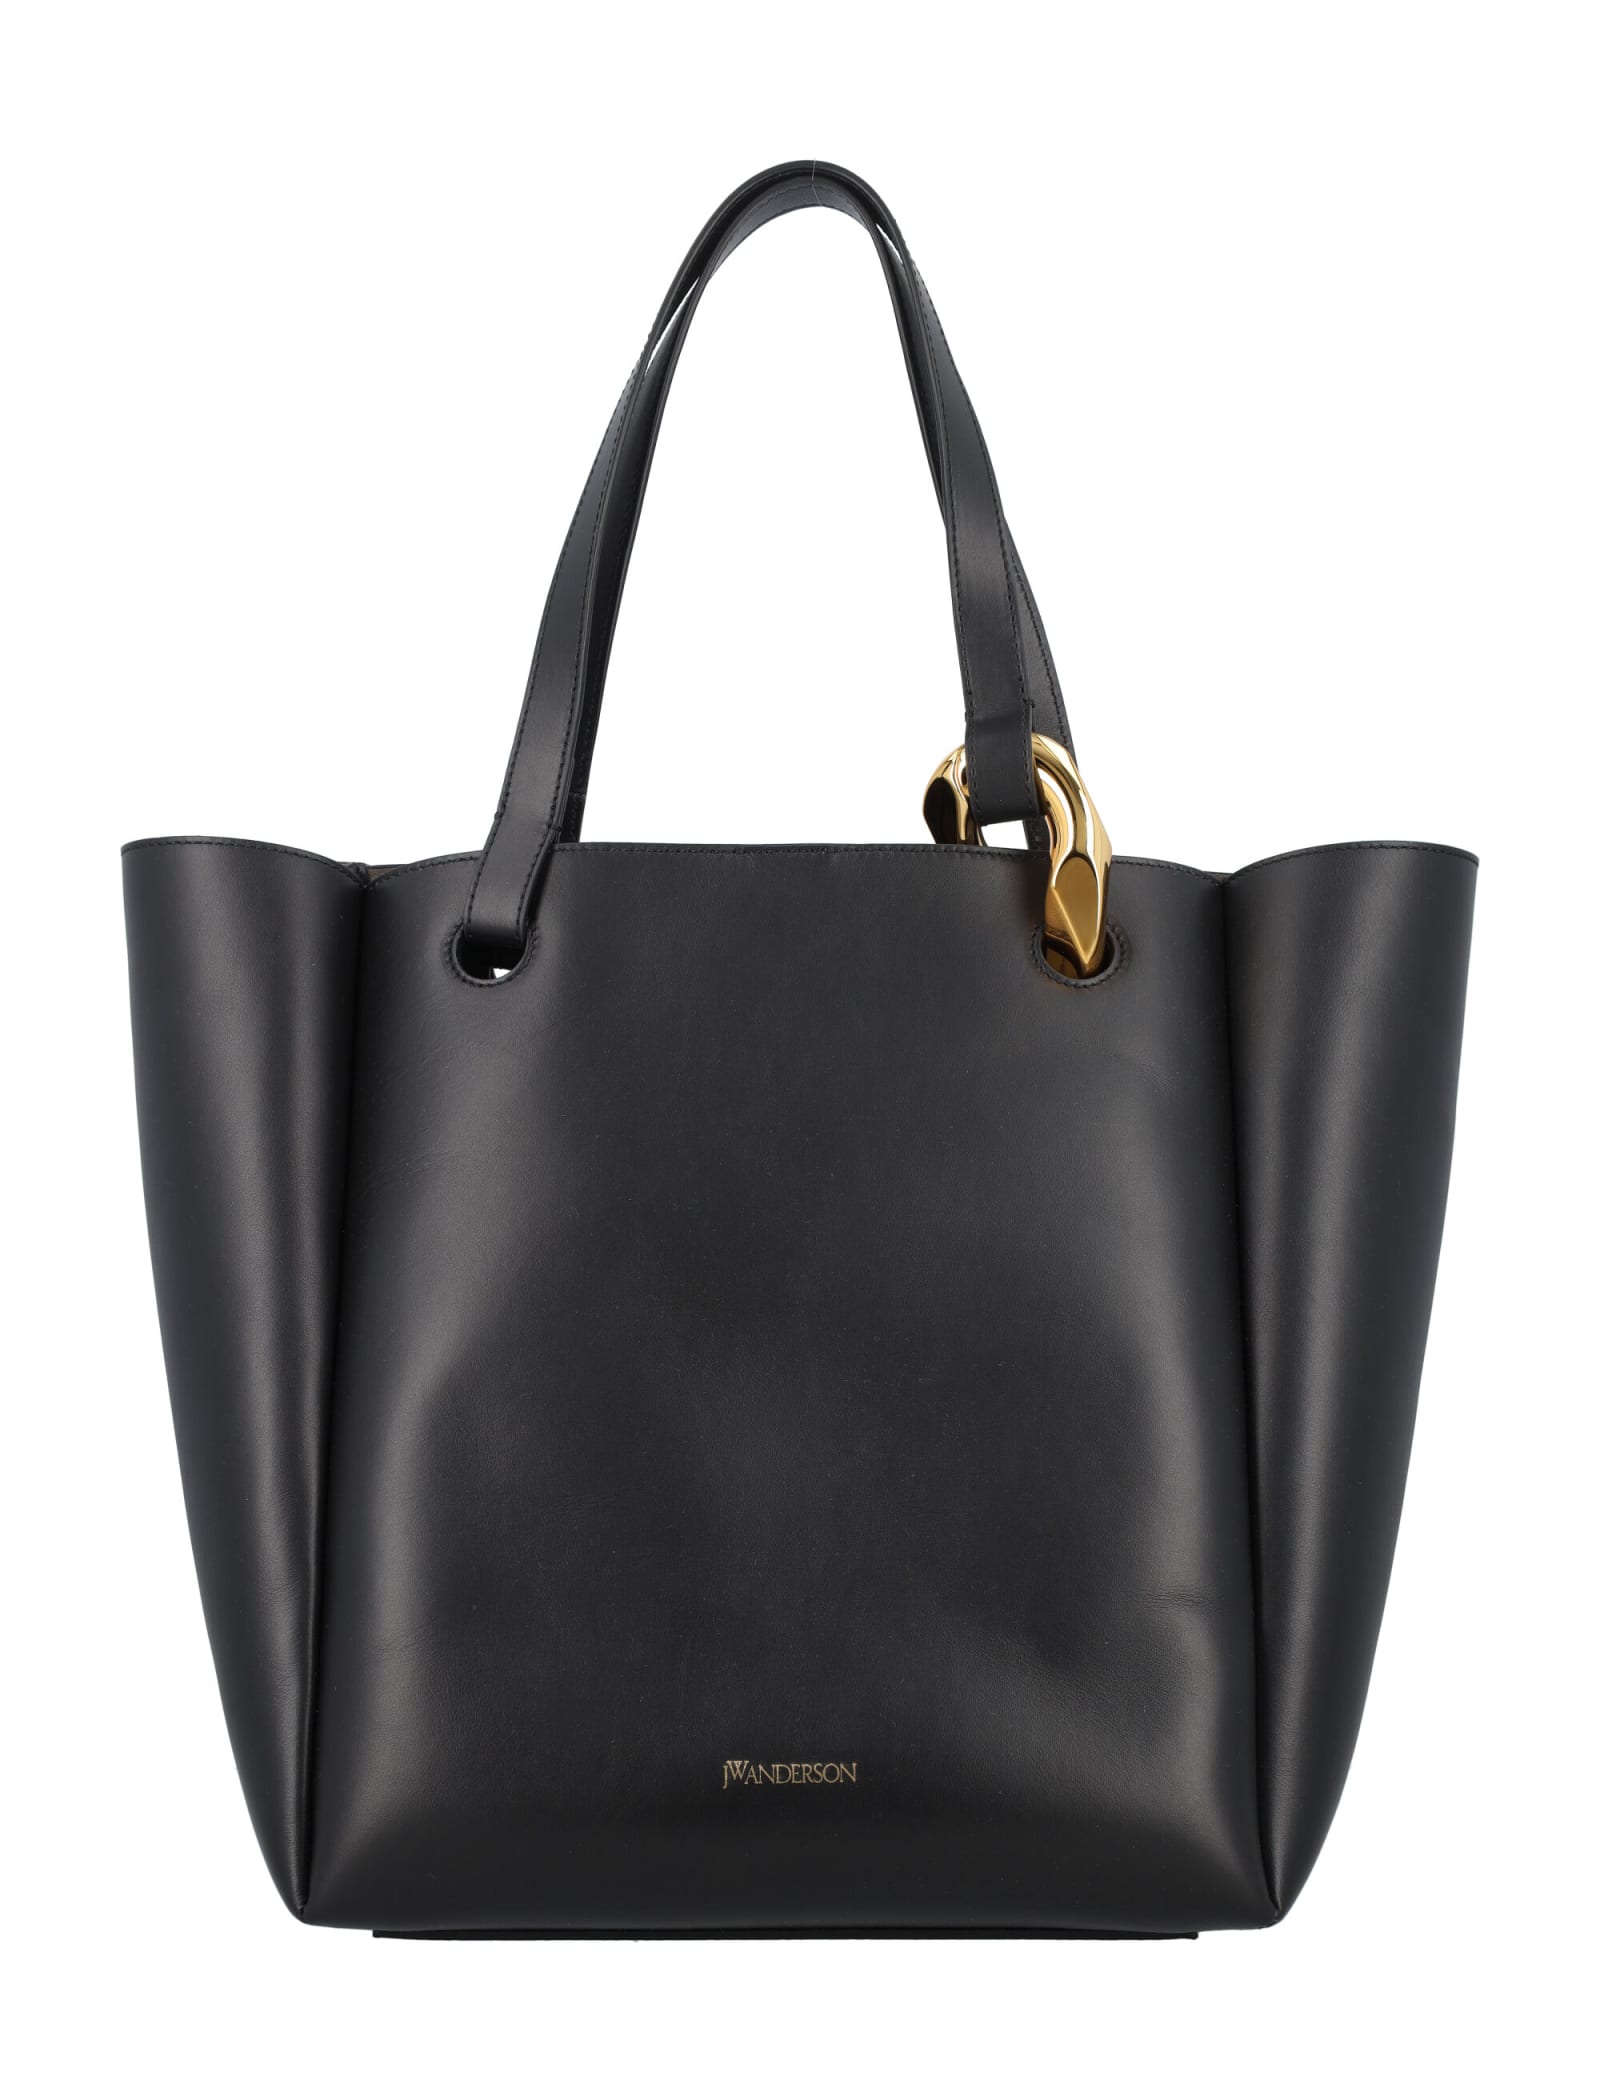 JW ANDERSON CHIAN CABAS TOTE